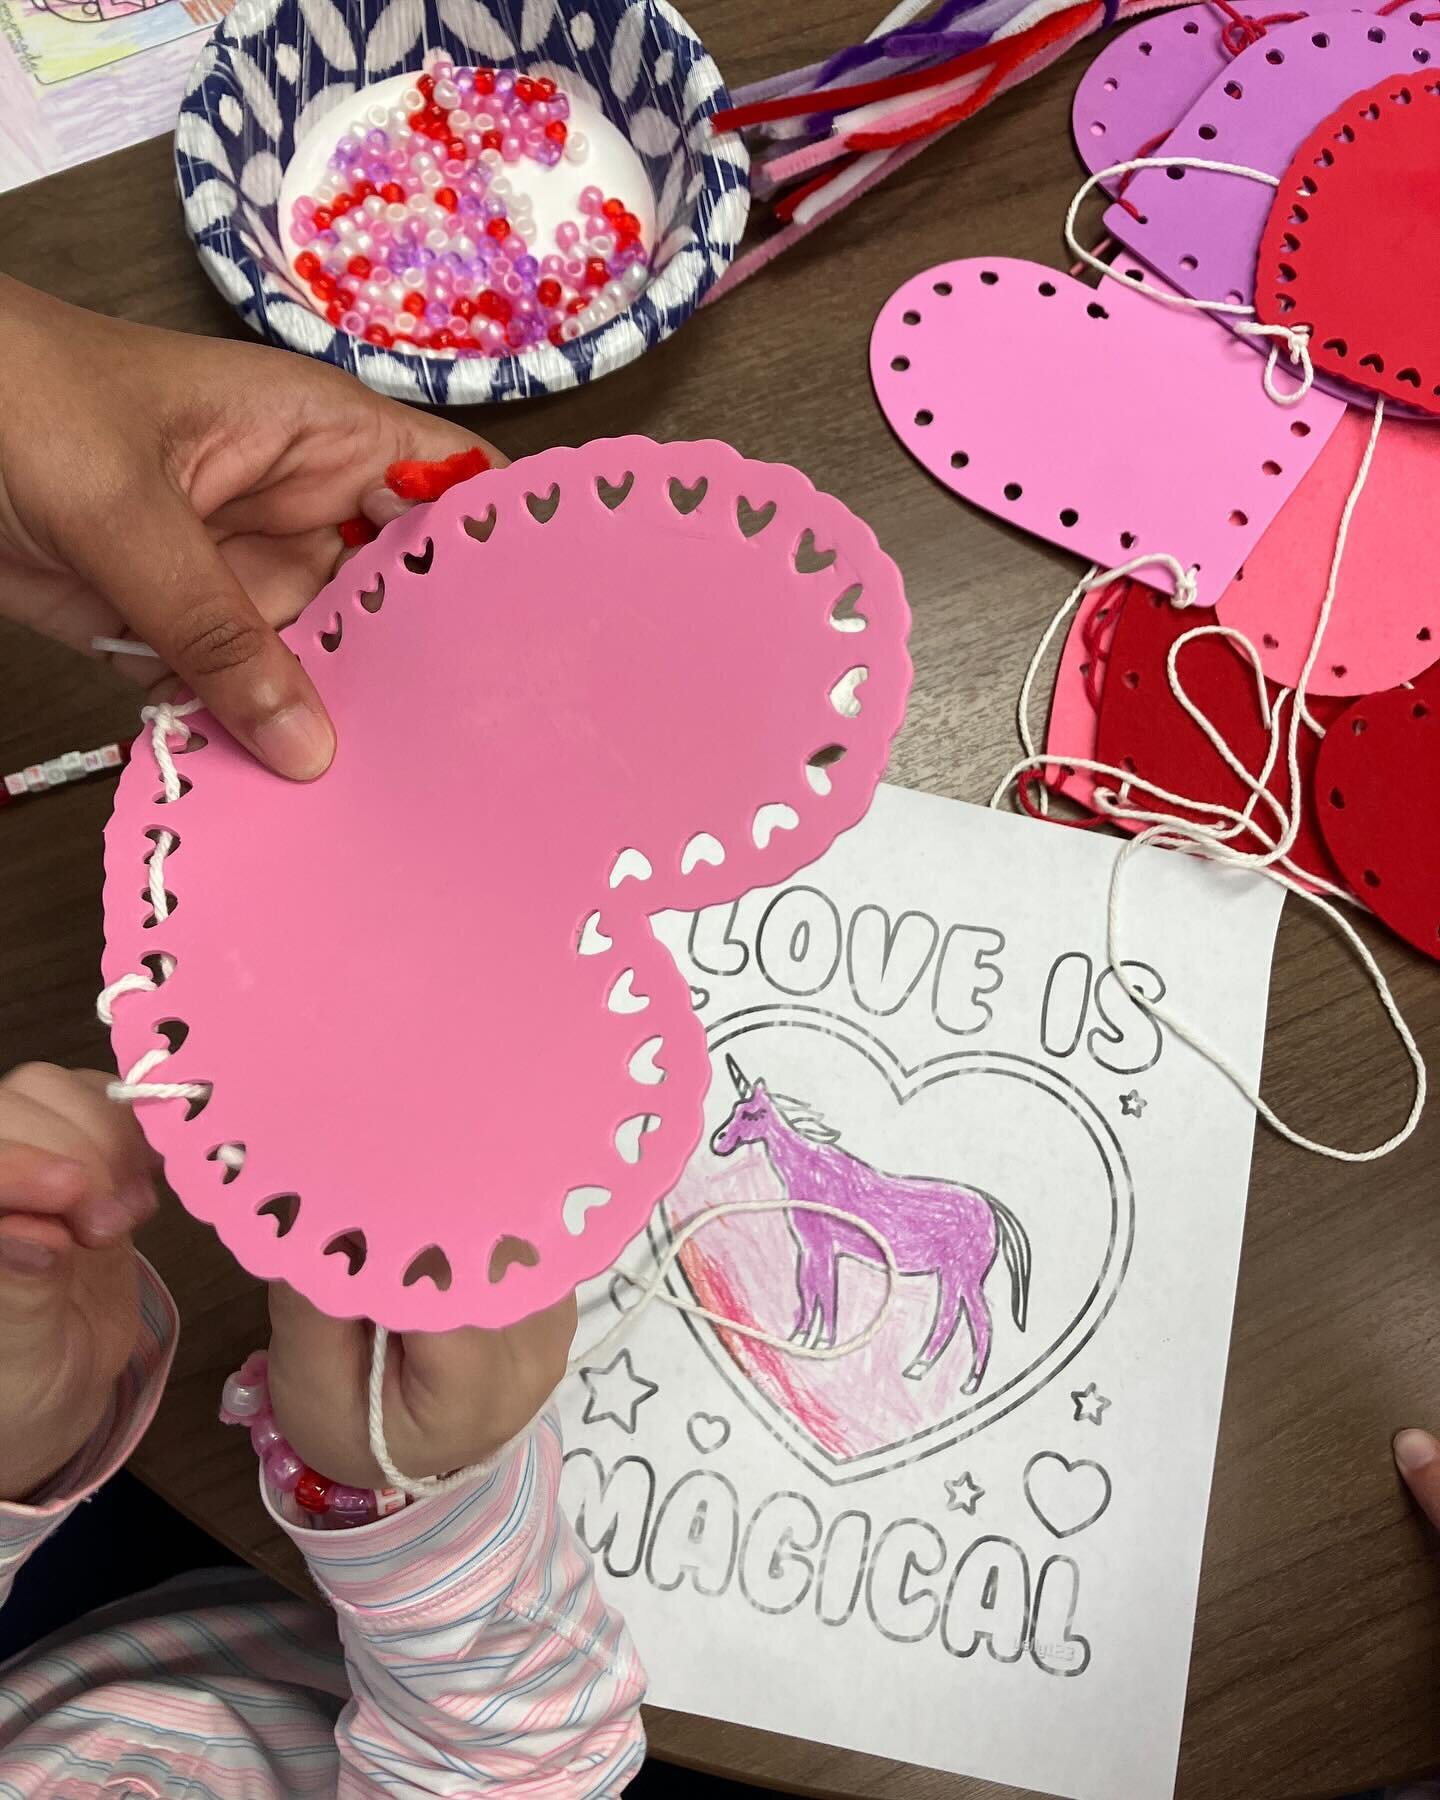 Happy Valentine&rsquo;s Day from Pals! Our San Mateo office celebrated yesterday by making and exchanging Valentine&rsquo;s, picture frames, bracelets, and other craft projects❤️💗

#PALS #pacificautism #sanmateo #aba #abatherapy #autosm #california 